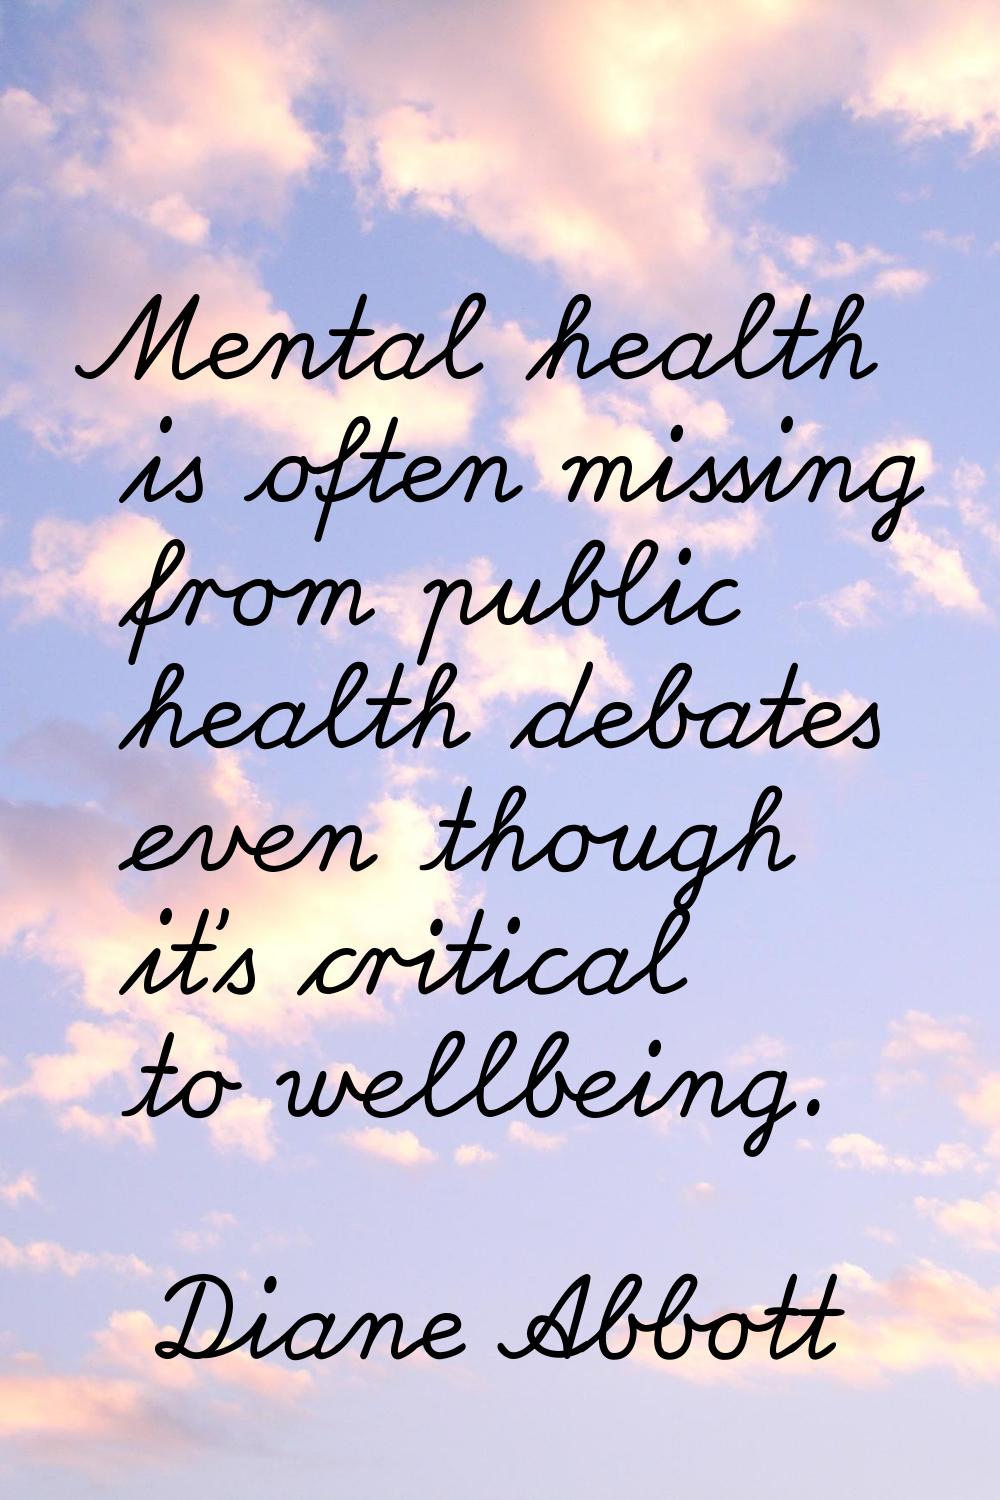 Mental health is often missing from public health debates even though it's critical to wellbeing.